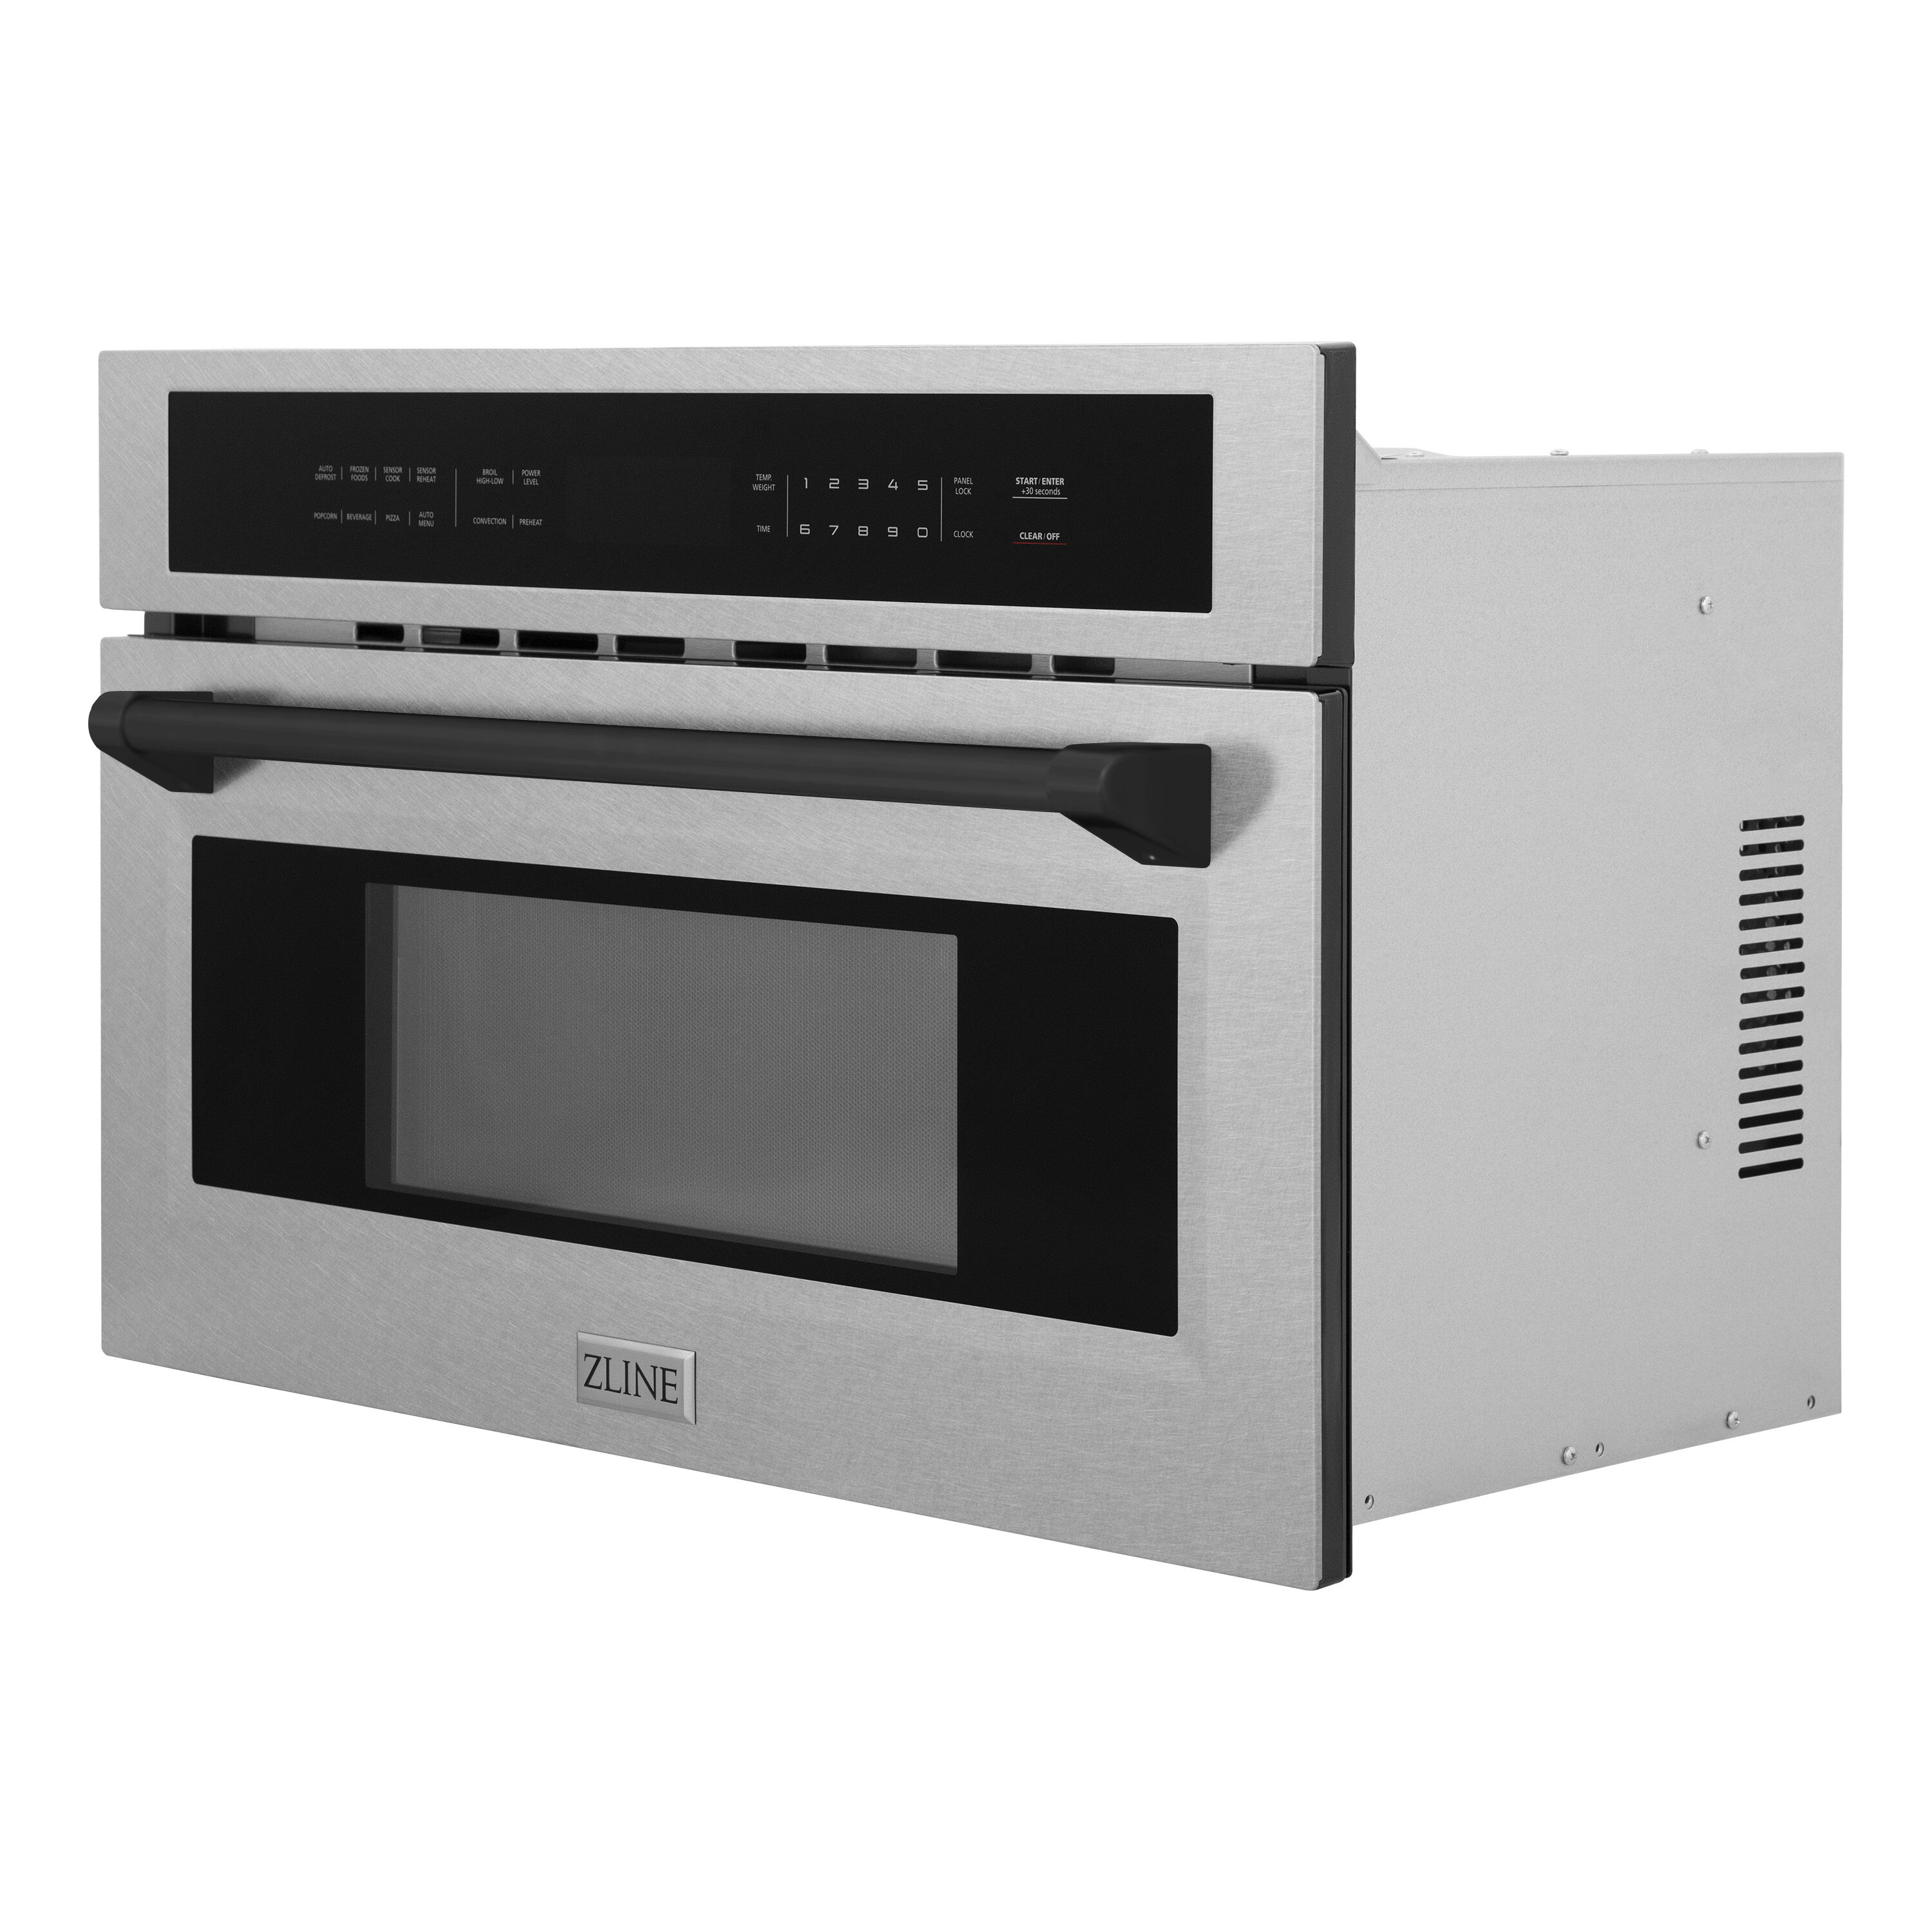 ZLINE Autograph Edition 30 1.6 Cu ft. Built-in Convection Microwave Oven in Fingerprint Resistant Stainless Steel and Matte Black Accents